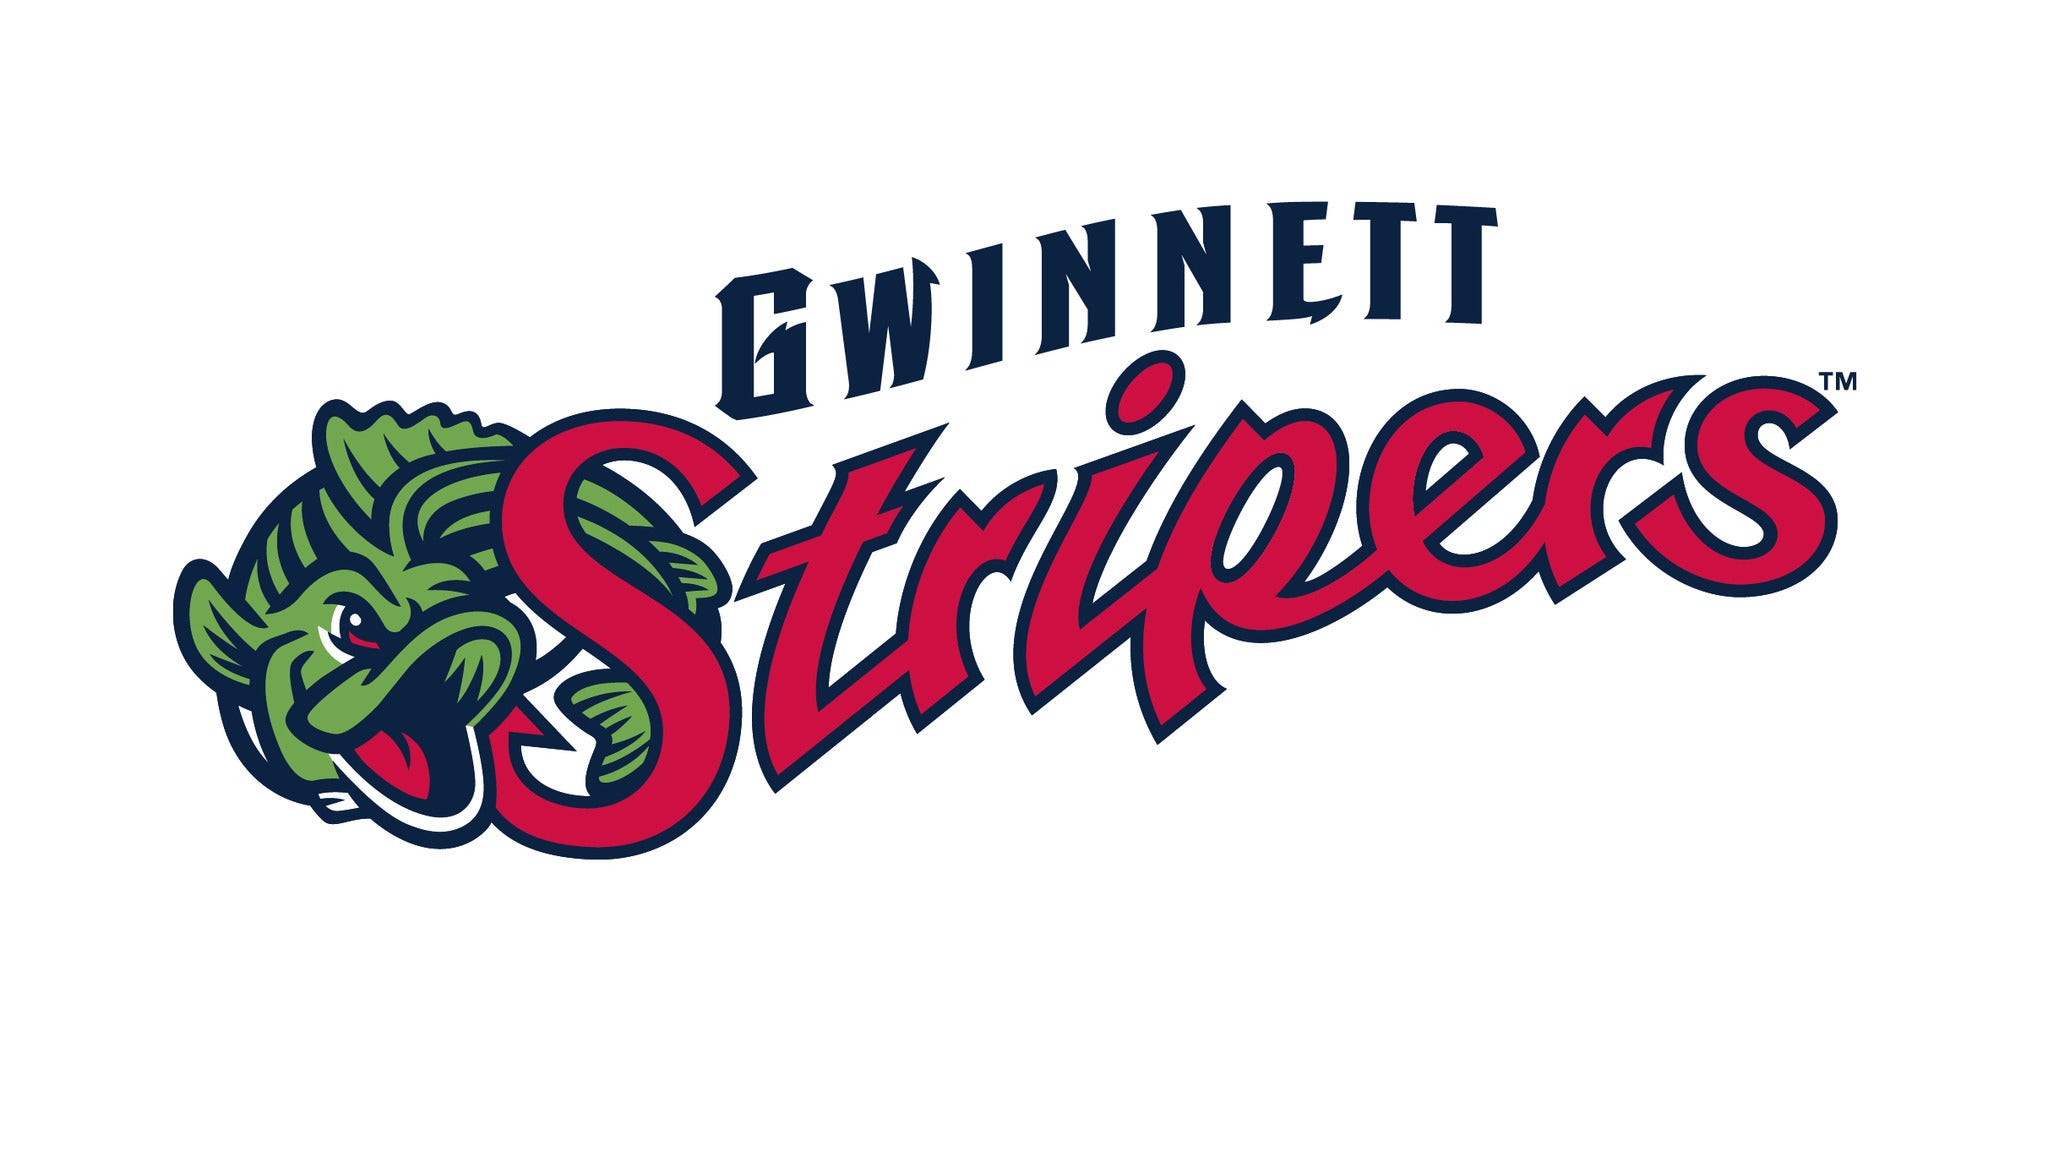 Gwinnett Stripers vs. Indianapolis Indians in Lawrenceville promo photo for Newsletter presale offer code